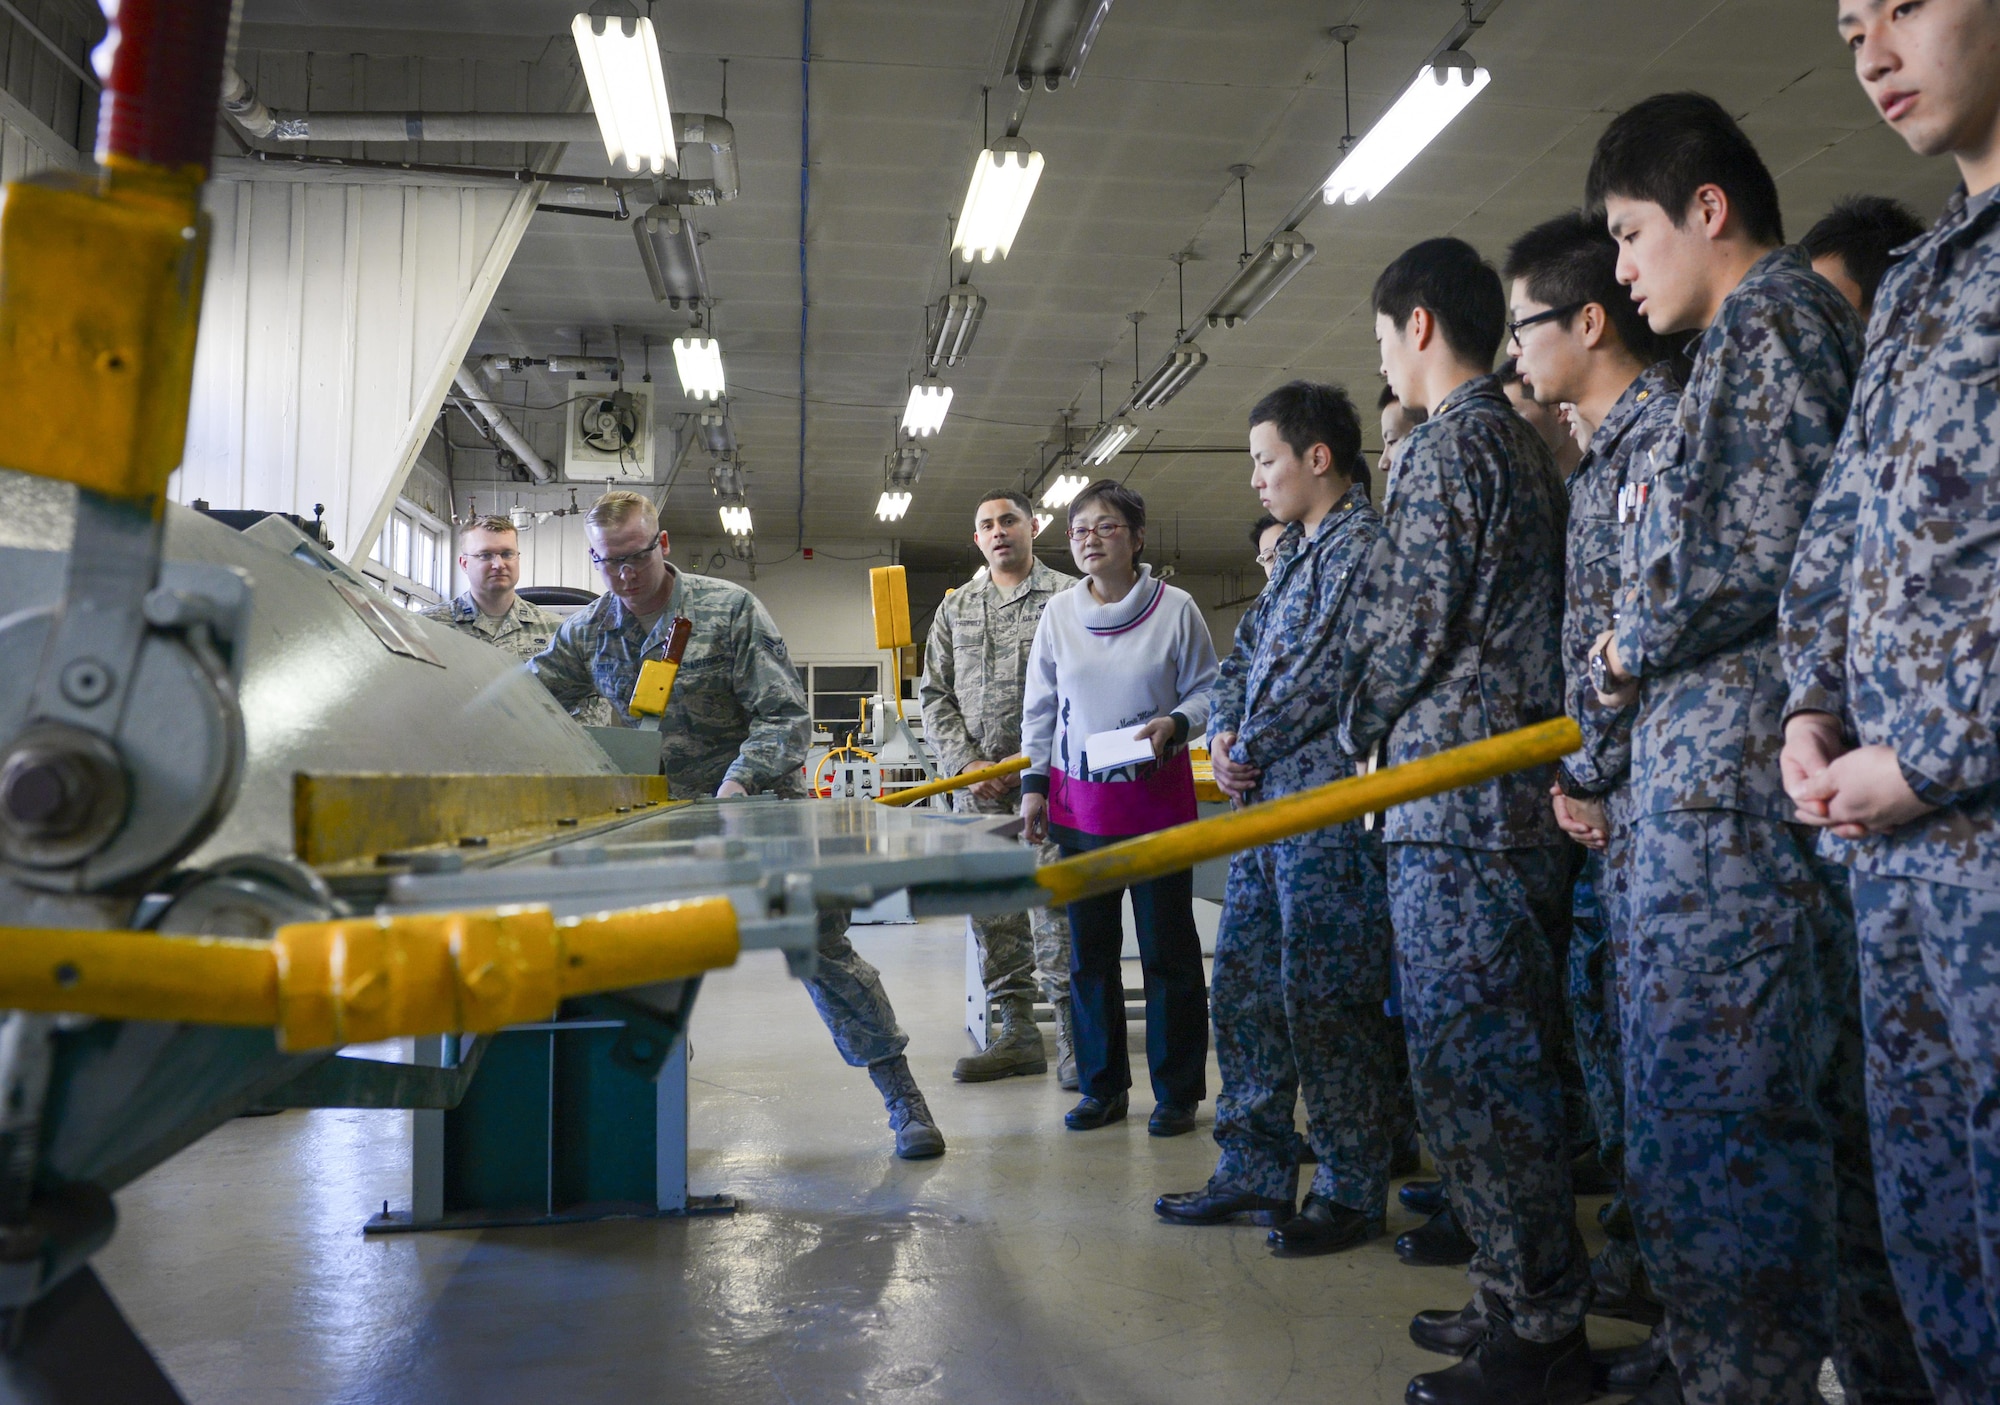 Senior Airman Douglas Smith, 374th Maintenance Squadron fabrication flight aircraft structural journeyman, demonstrates a machine for cutting sheet metal to Japan Air Self Defense Force maintenance officers-in-training at Yokota Air Base, Japan, Jan. 25, 2017.  The officers-in-training interacted with Yokota Airmen, asked questions and witnessed firsthand how maintenance operates at Yokota. Interactive bilateral visits are designed to strengthen Japan-U.S. relations and improve how they operate together. (U.S. Air Force photo by Senior Airman Elizabeth Baker)